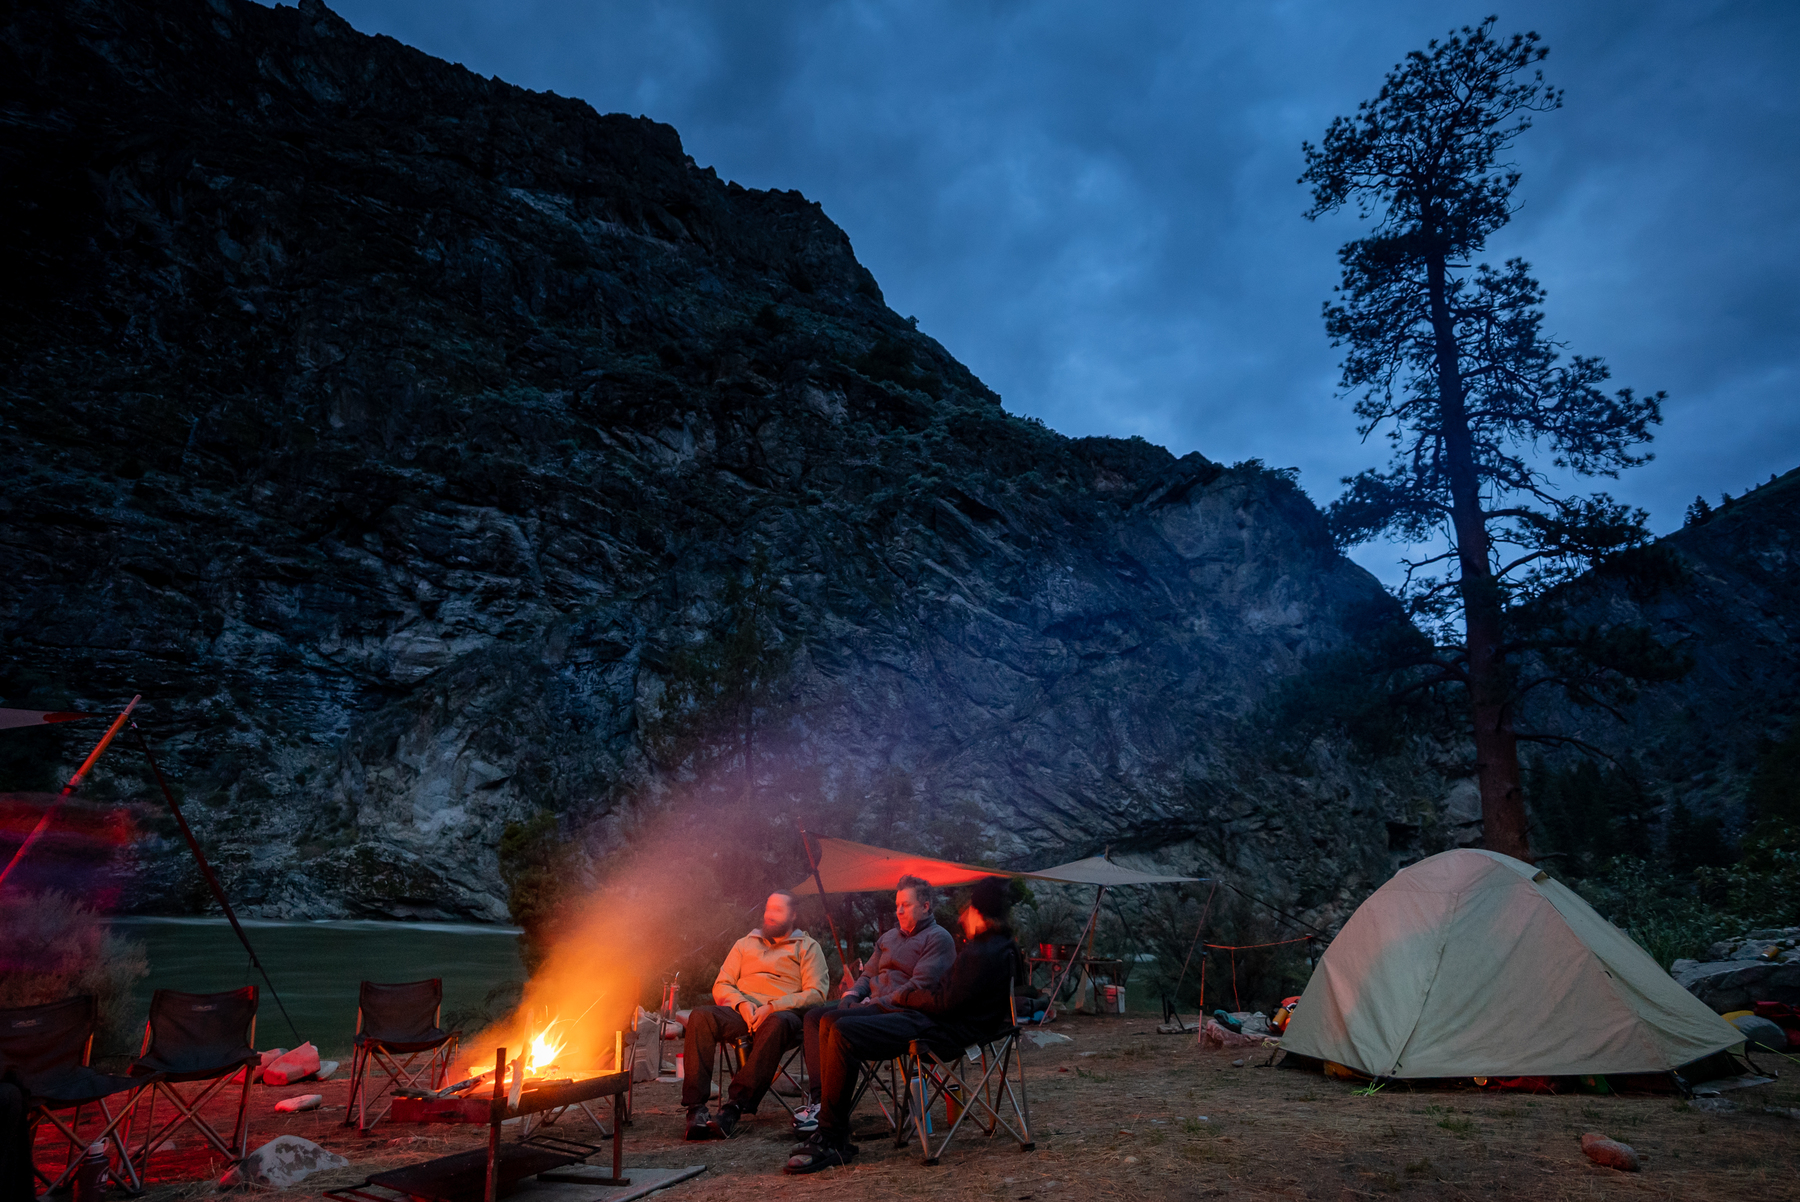 Camping along Idaho's Middle Fork of the Salmon River